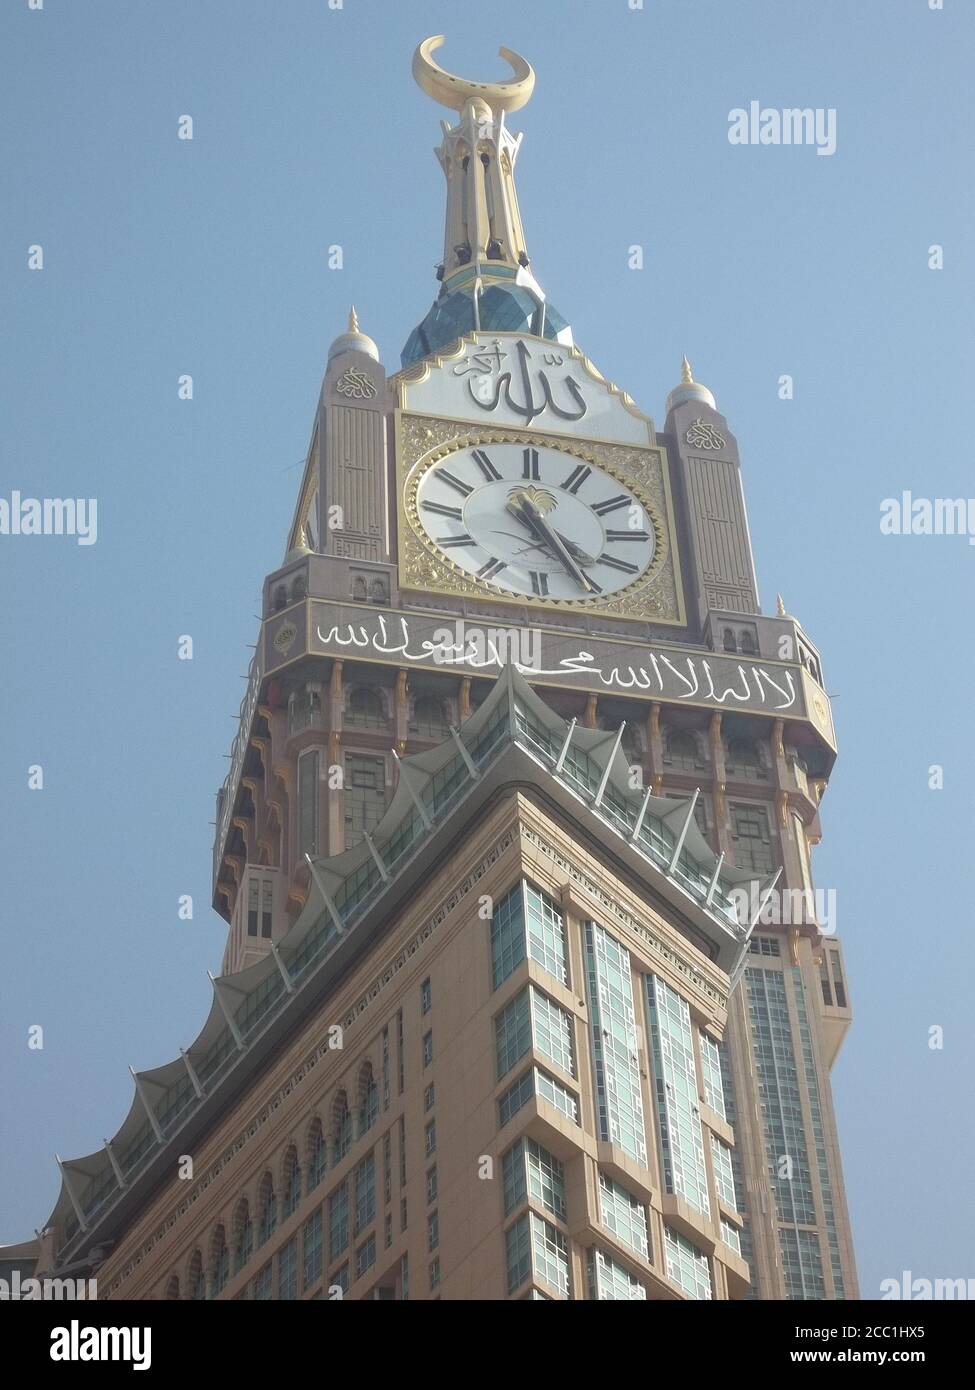 View of the clock Tower Building in Saudi Arabia Stock Photo